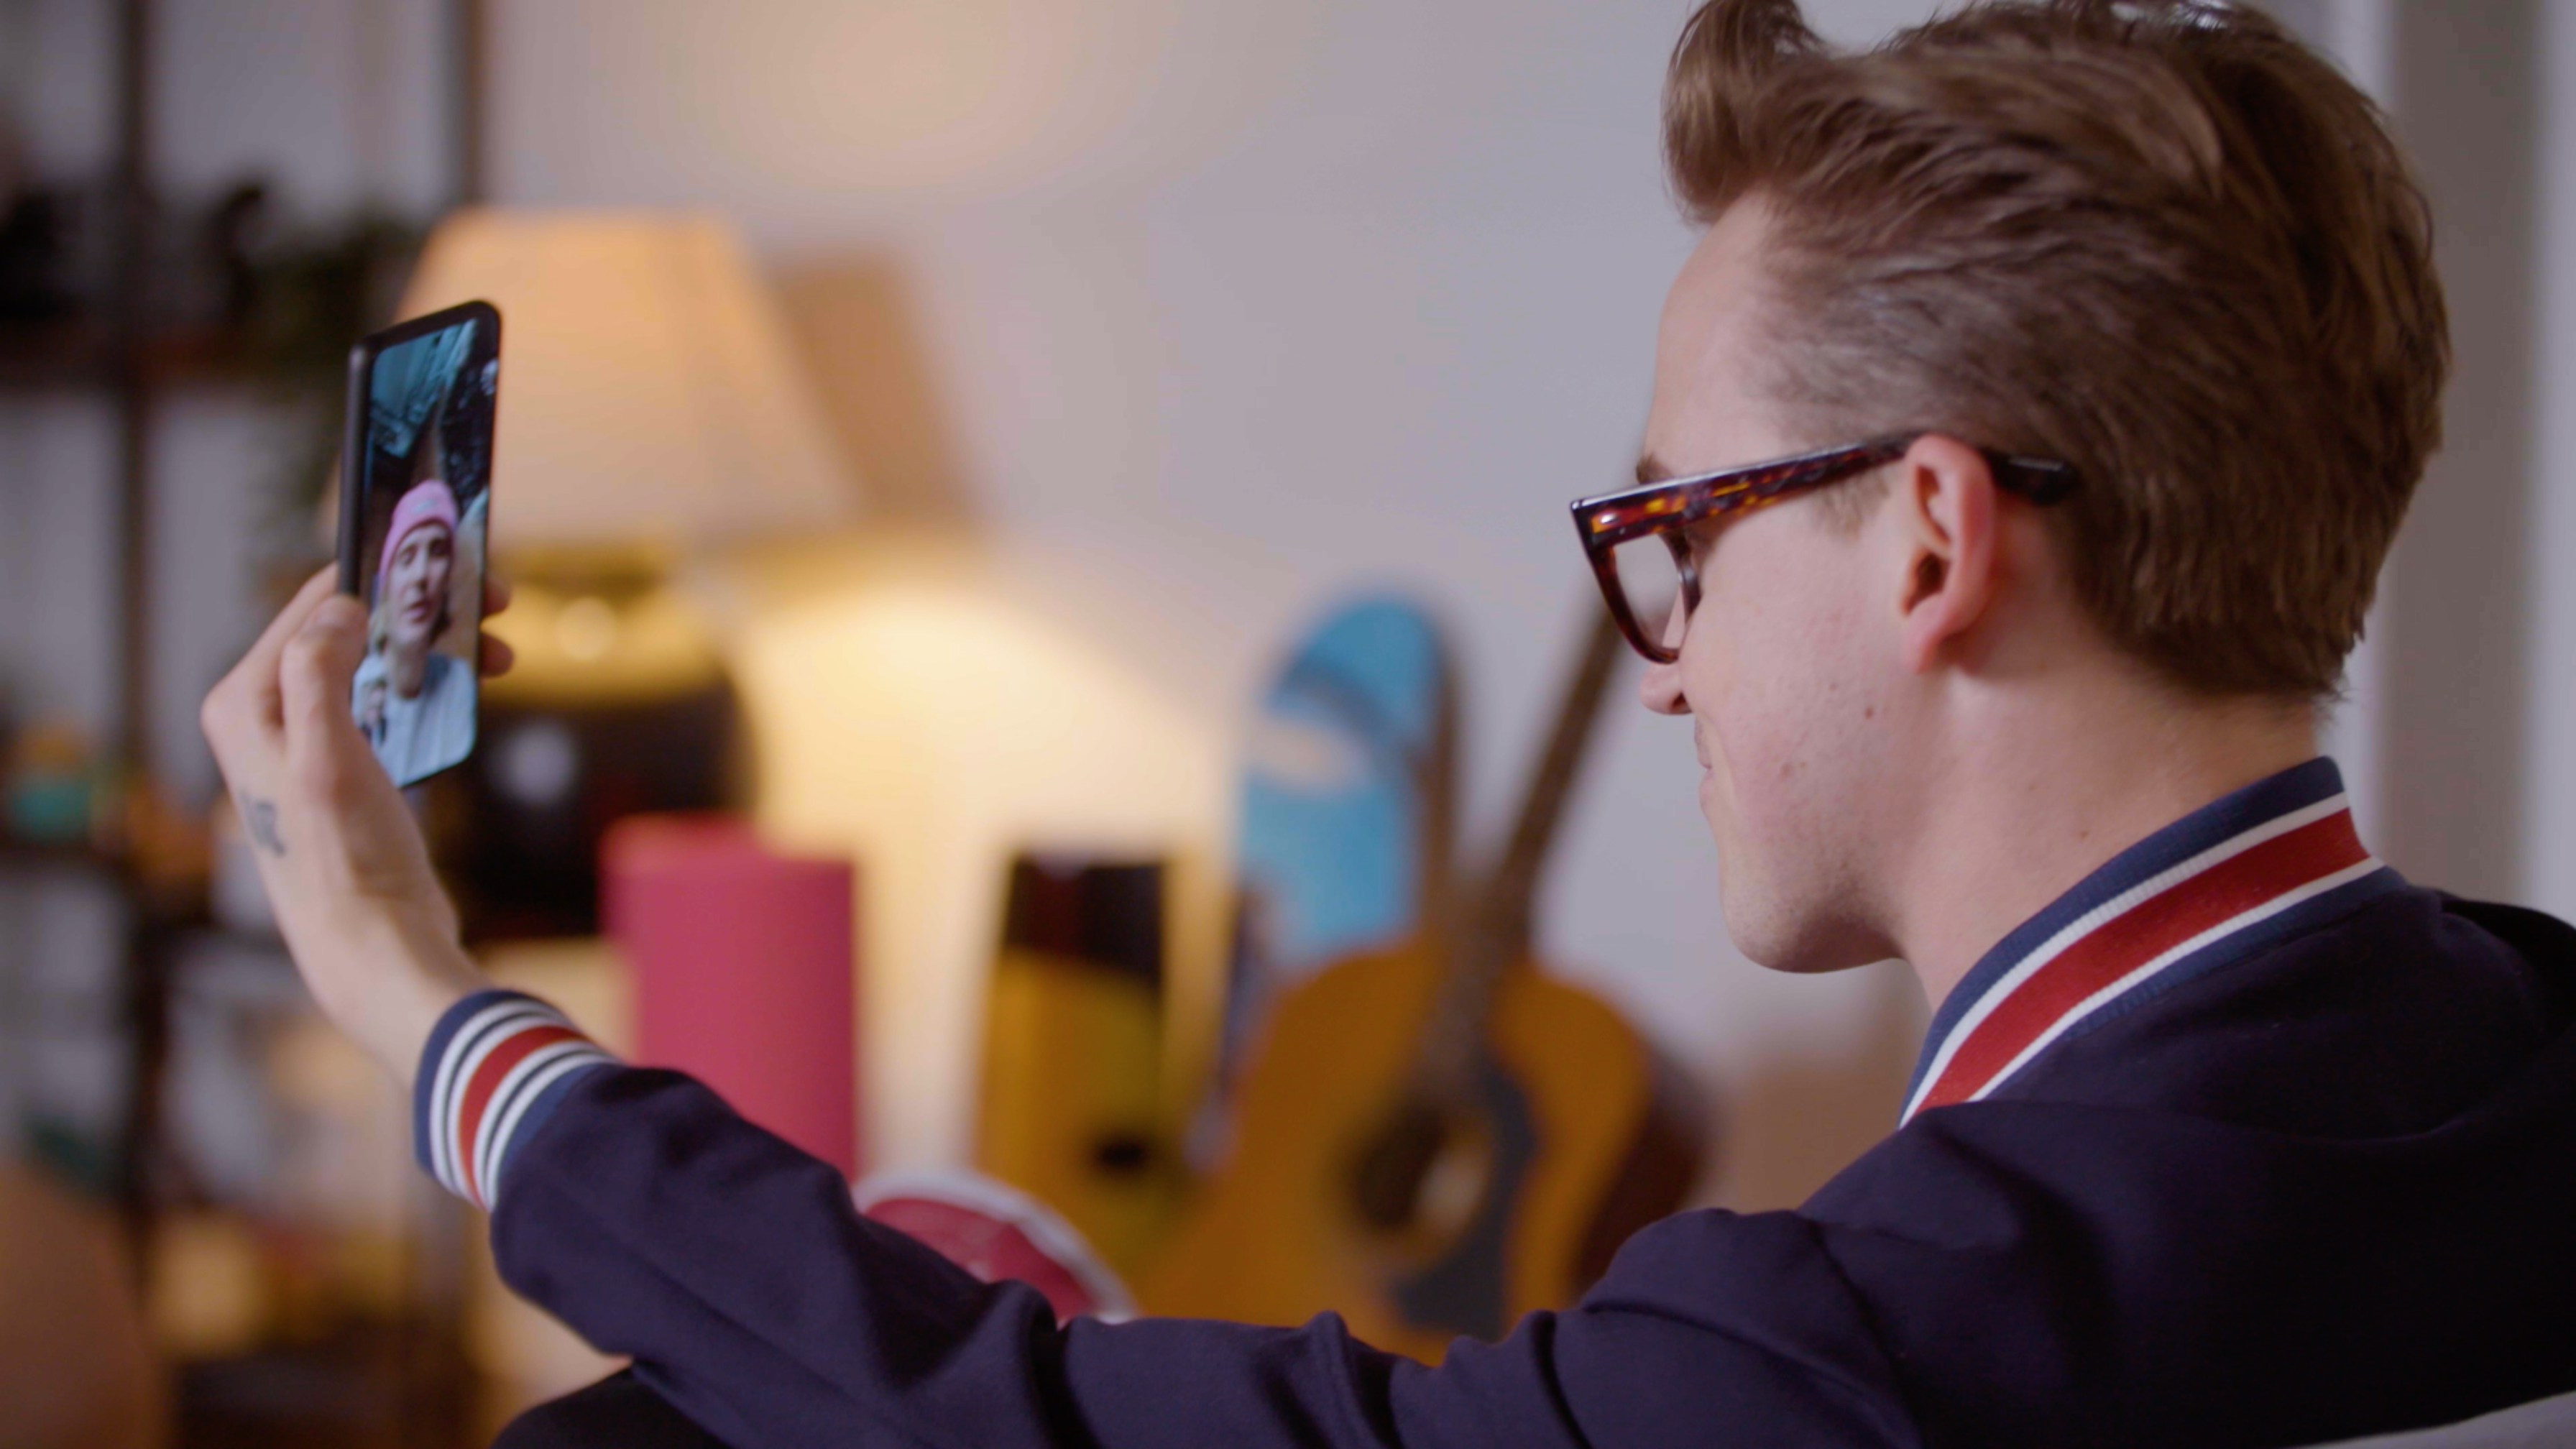 Tom Fletcher and Dougie Poynter are working with Three in partnership with Samaritans, to encourage people to become Better Phone Friends